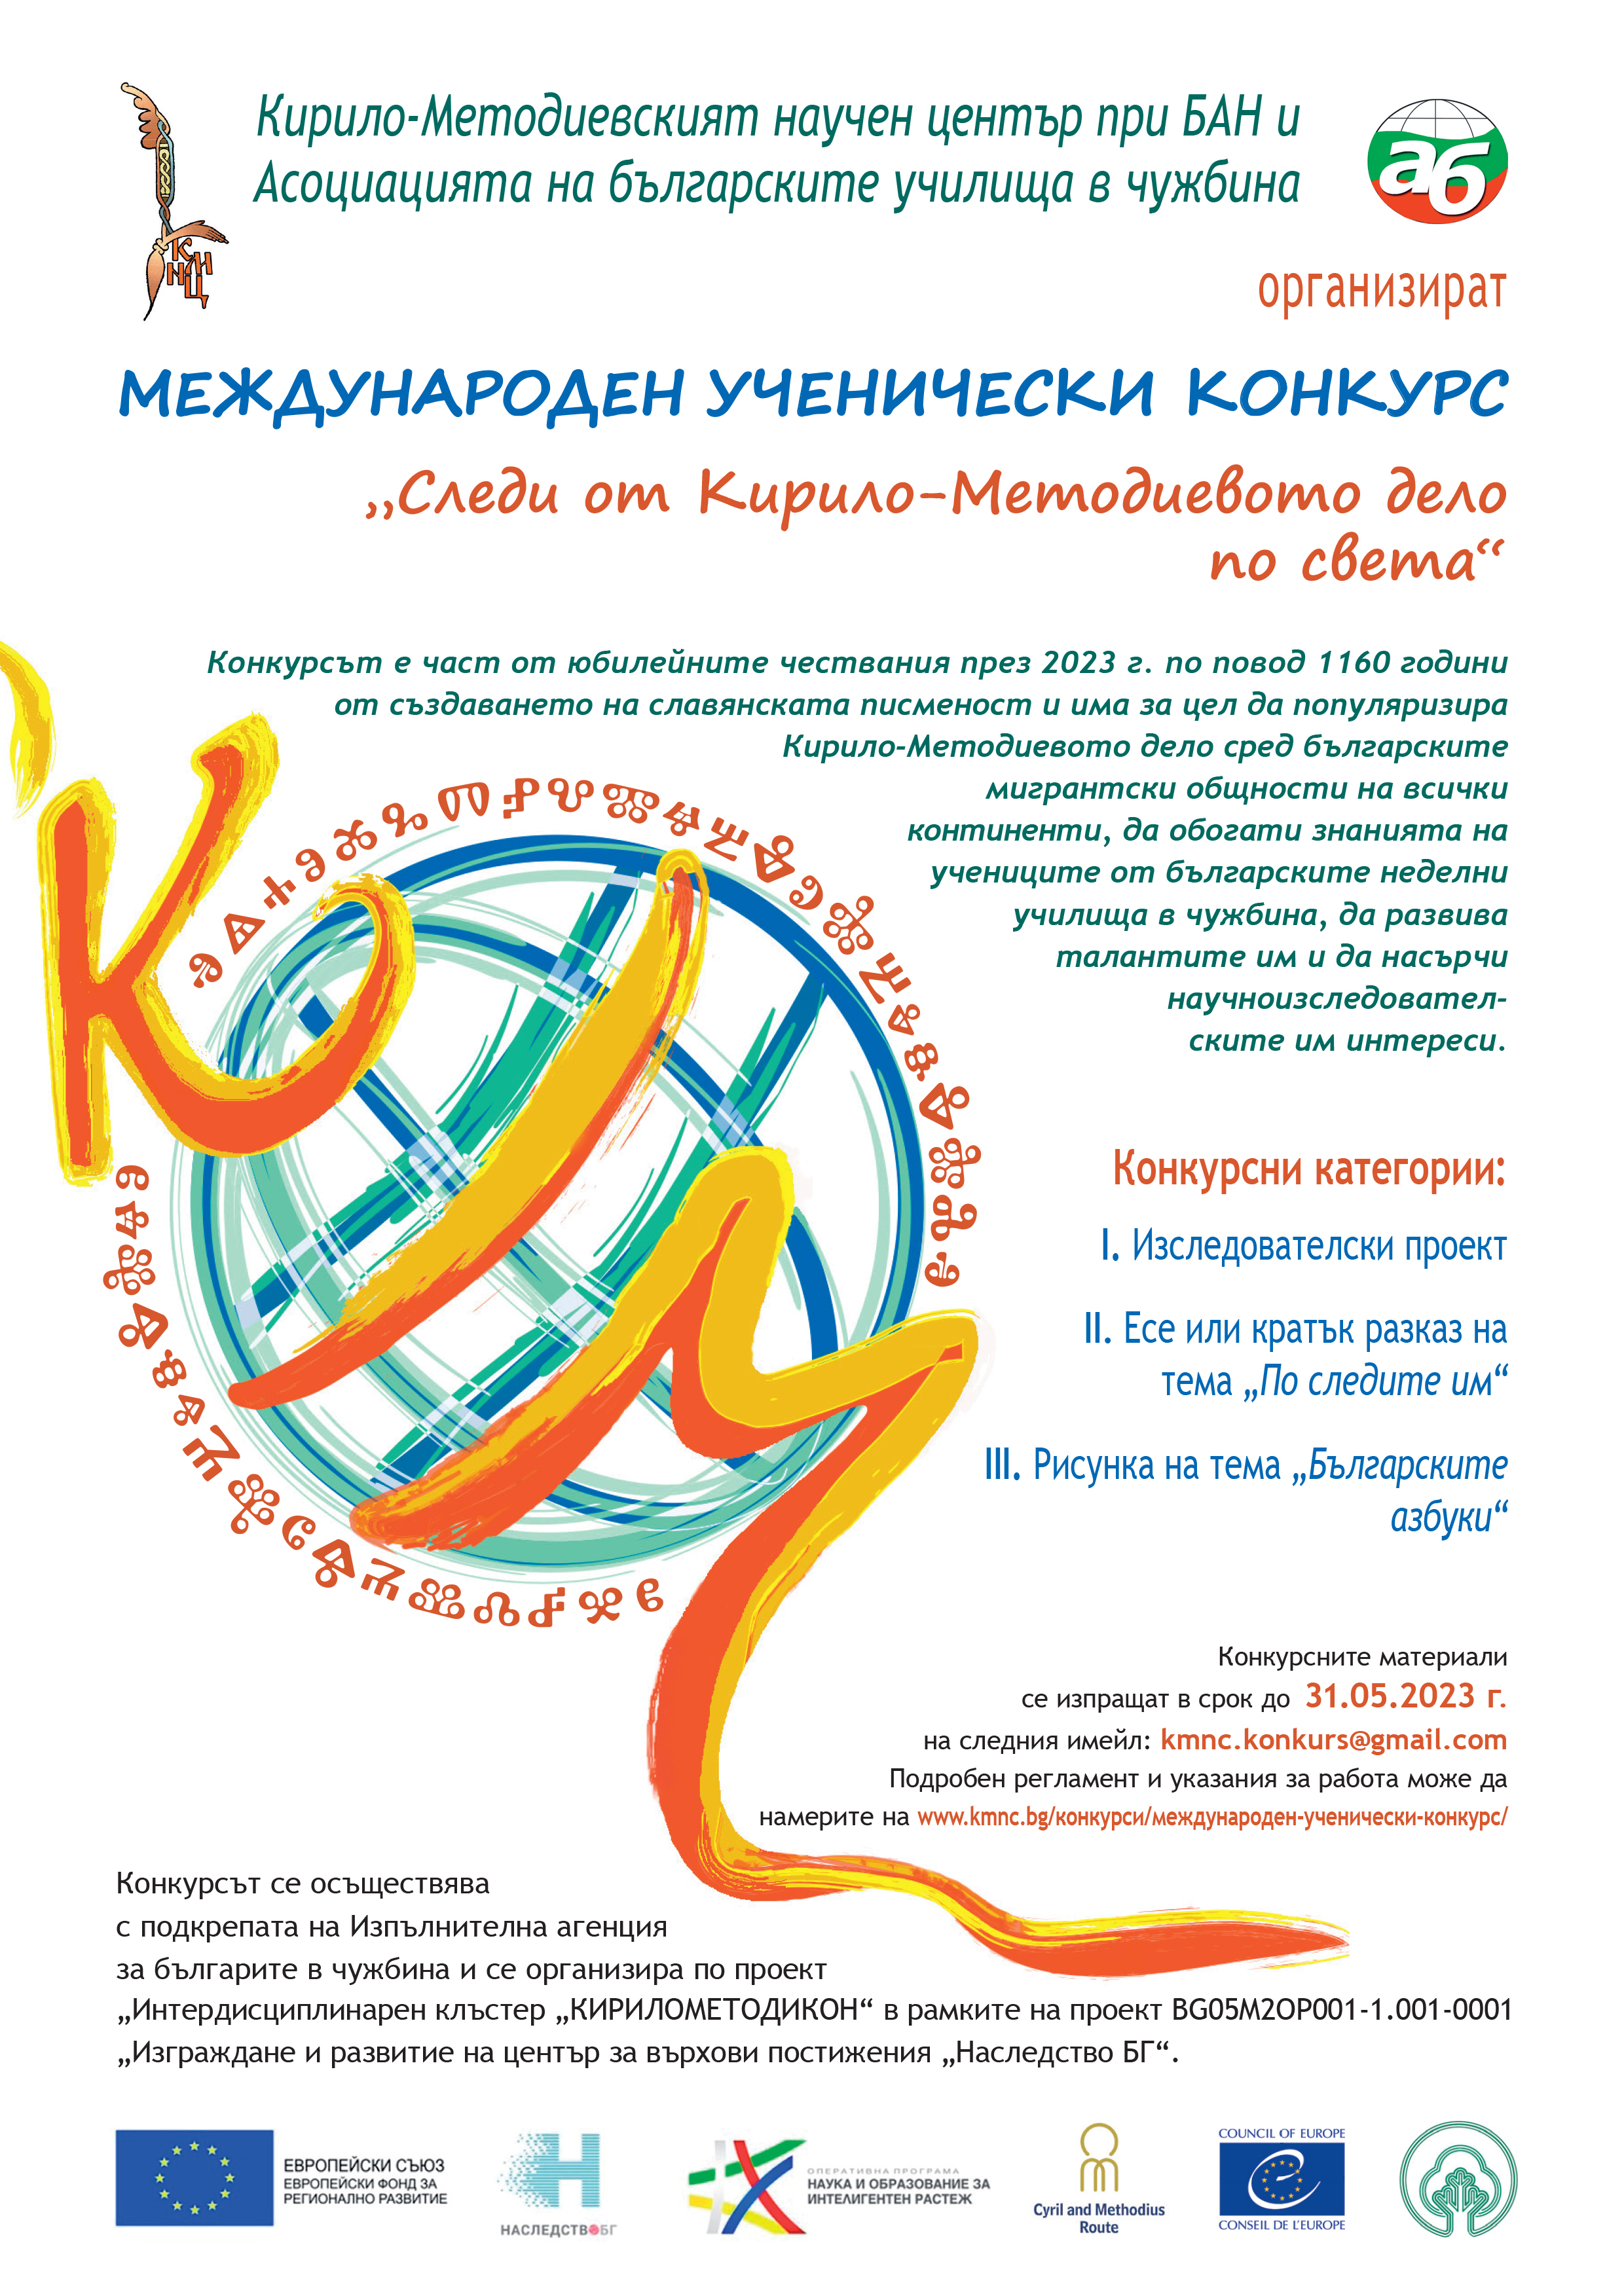 Theme - Cyril and Methodius Route - Cultural Route of the Council of Europe